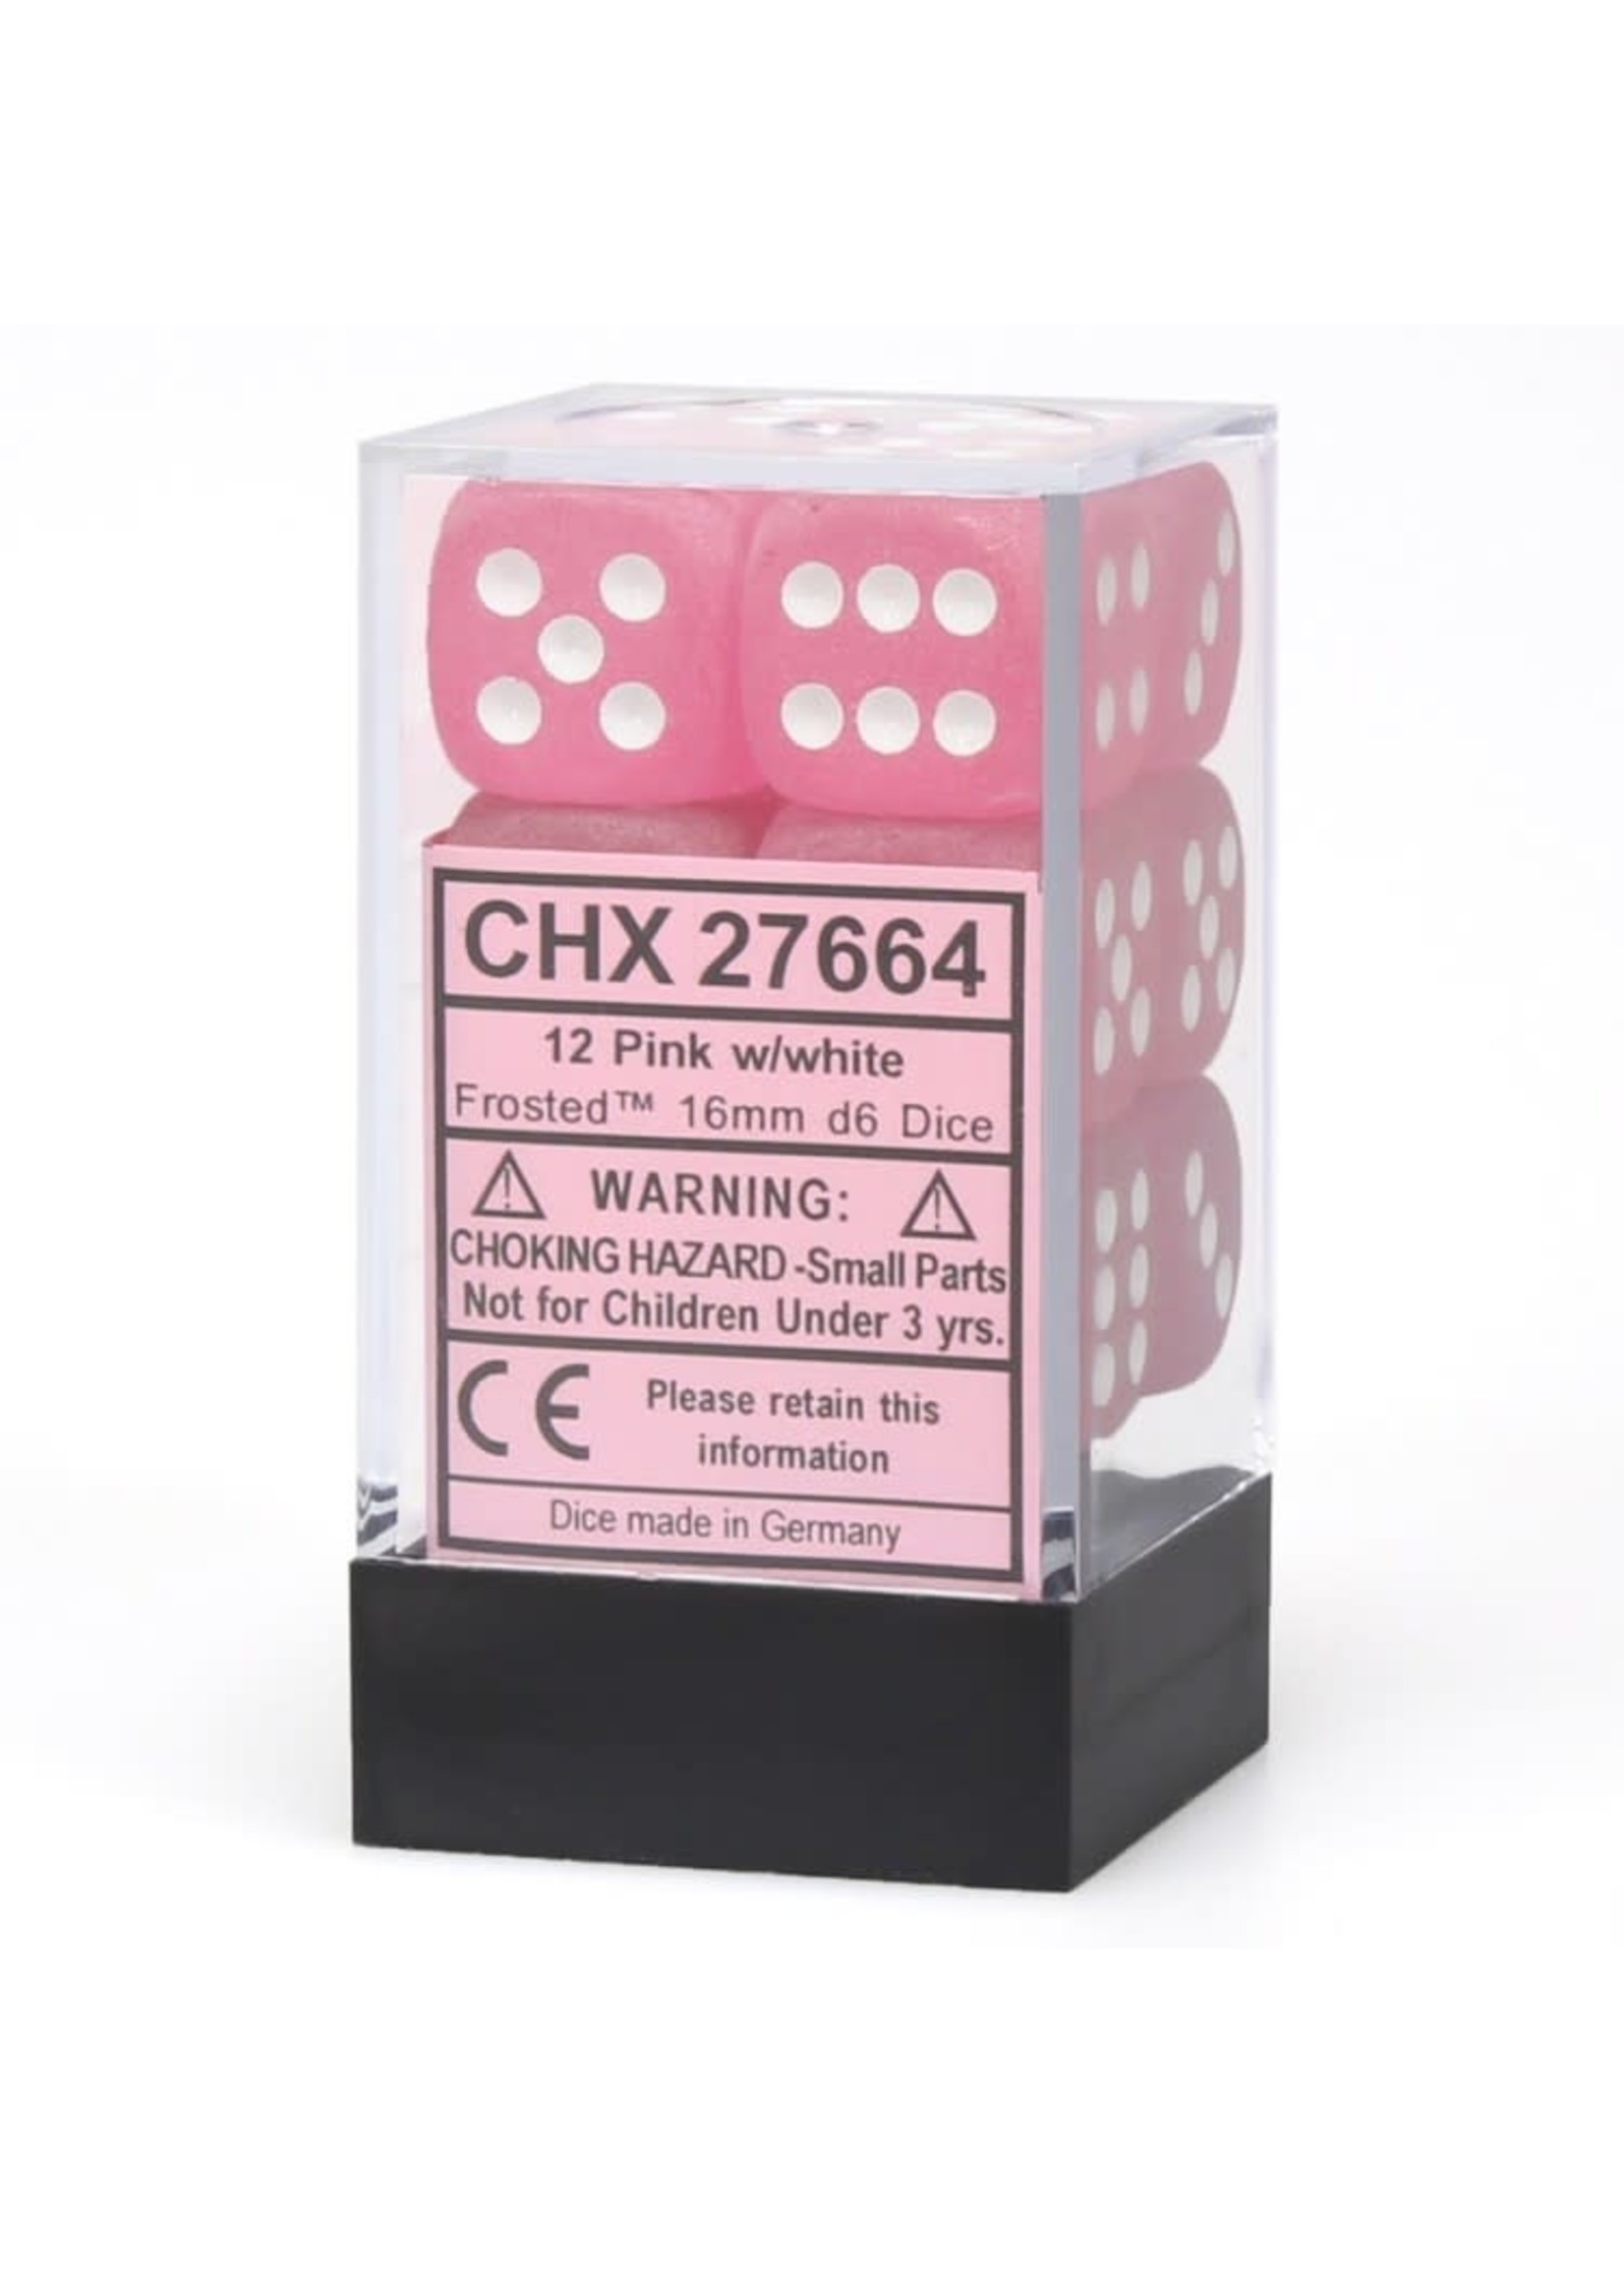 Chessex d6 Cube 16mm Frosted Pink w/ White (12)